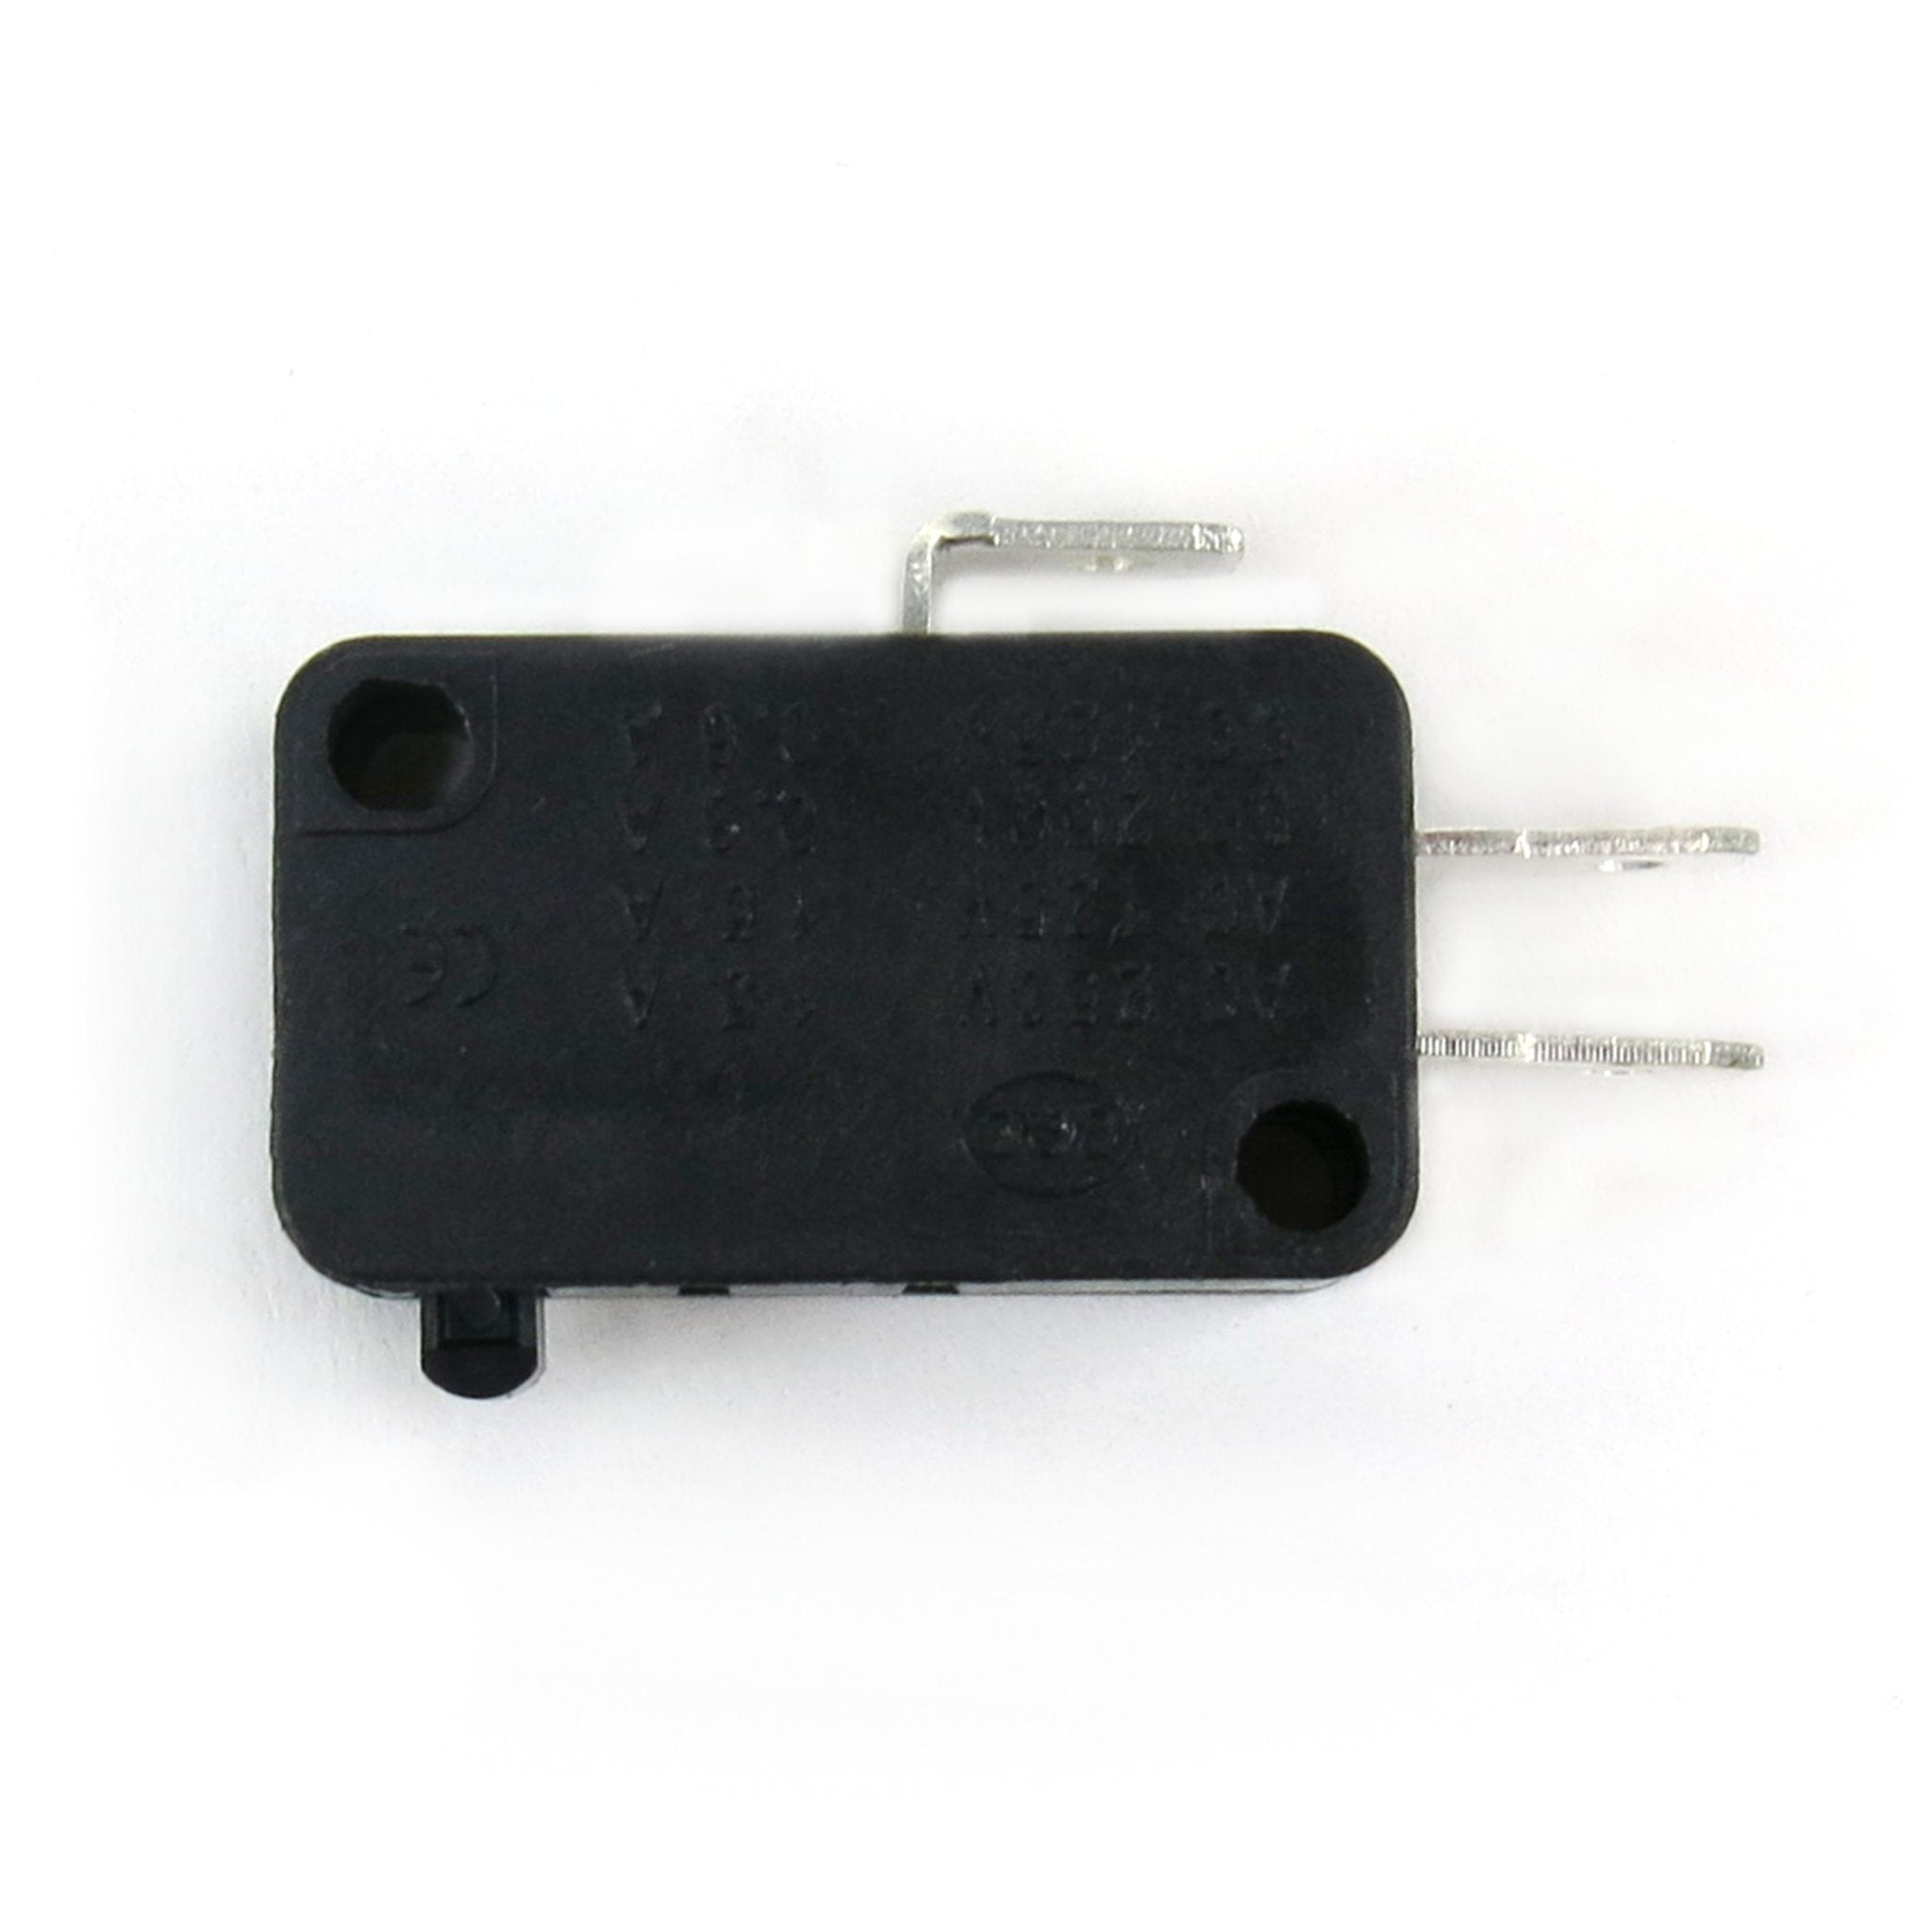 Momentary Push Button Micro Limit Switch SPDT 1NO 1NC 12V 6A Open Close Sensor